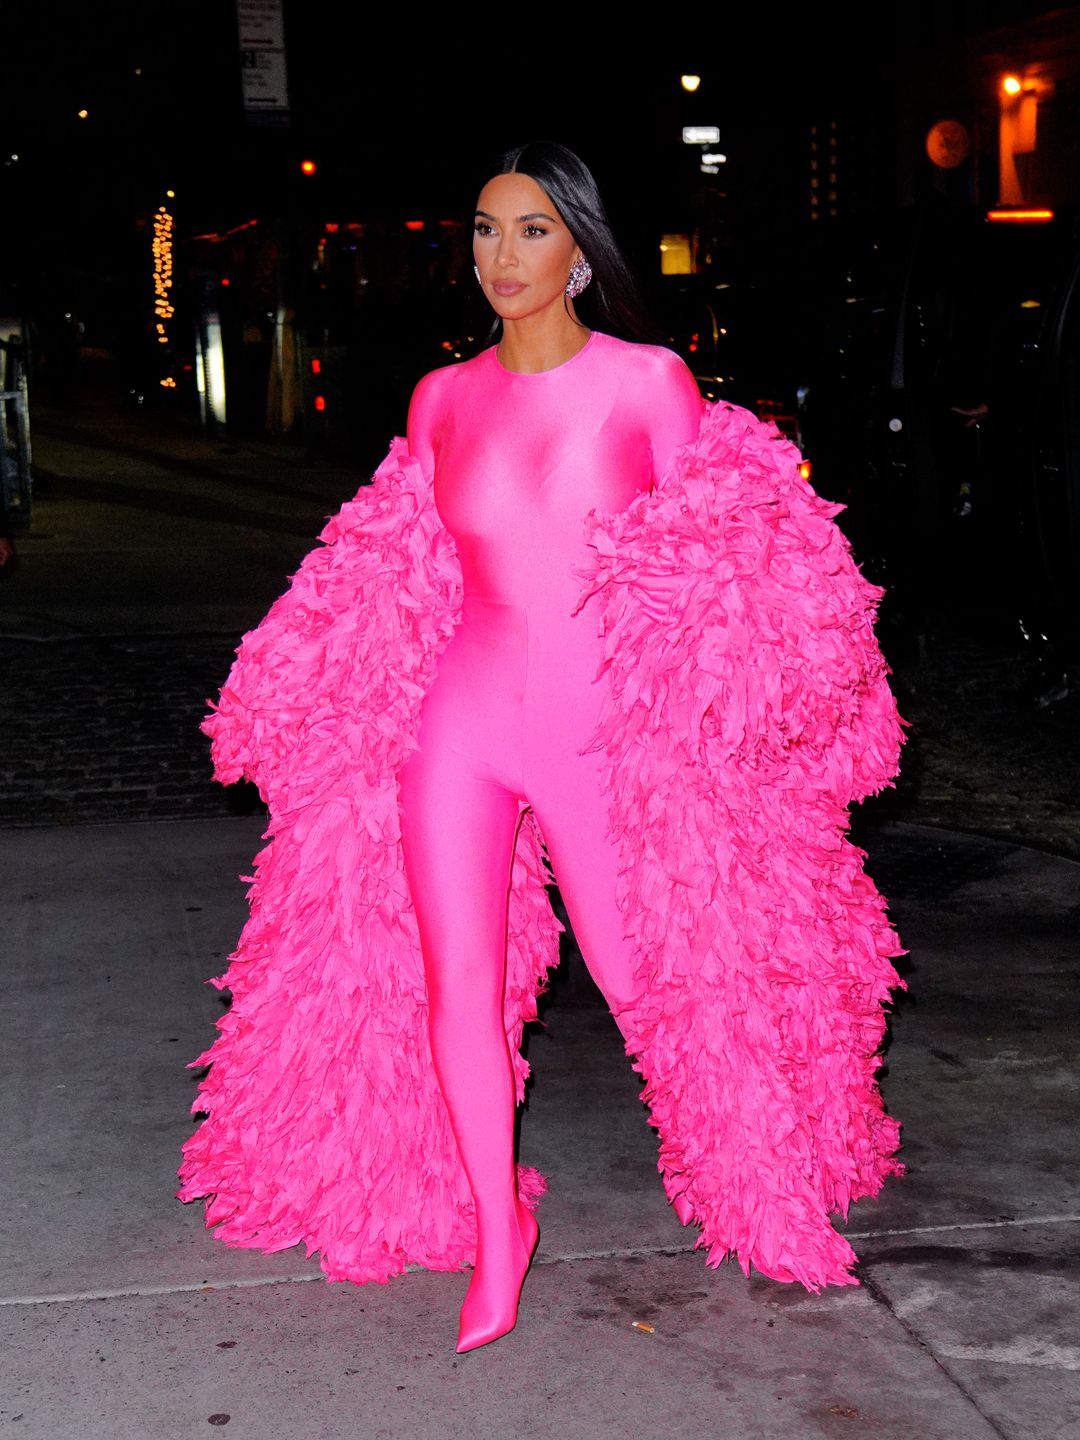 Ahead of the Barbiecore curve, Kim rocked hot pink at the Saturday Night Live afterparty in 2021 